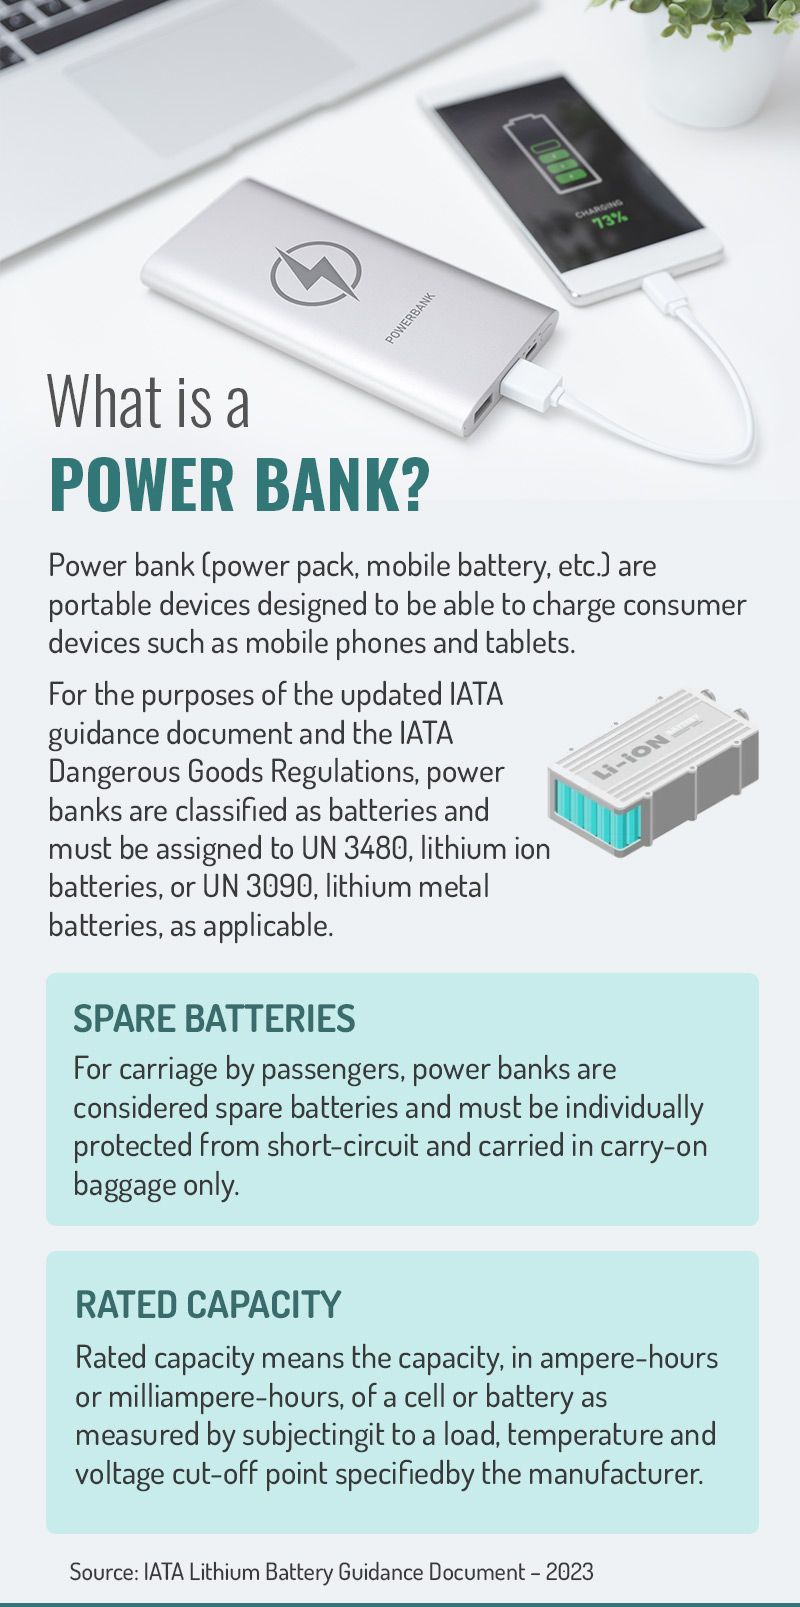 IATA guidelines for lithium batteries had been updated for 2023.